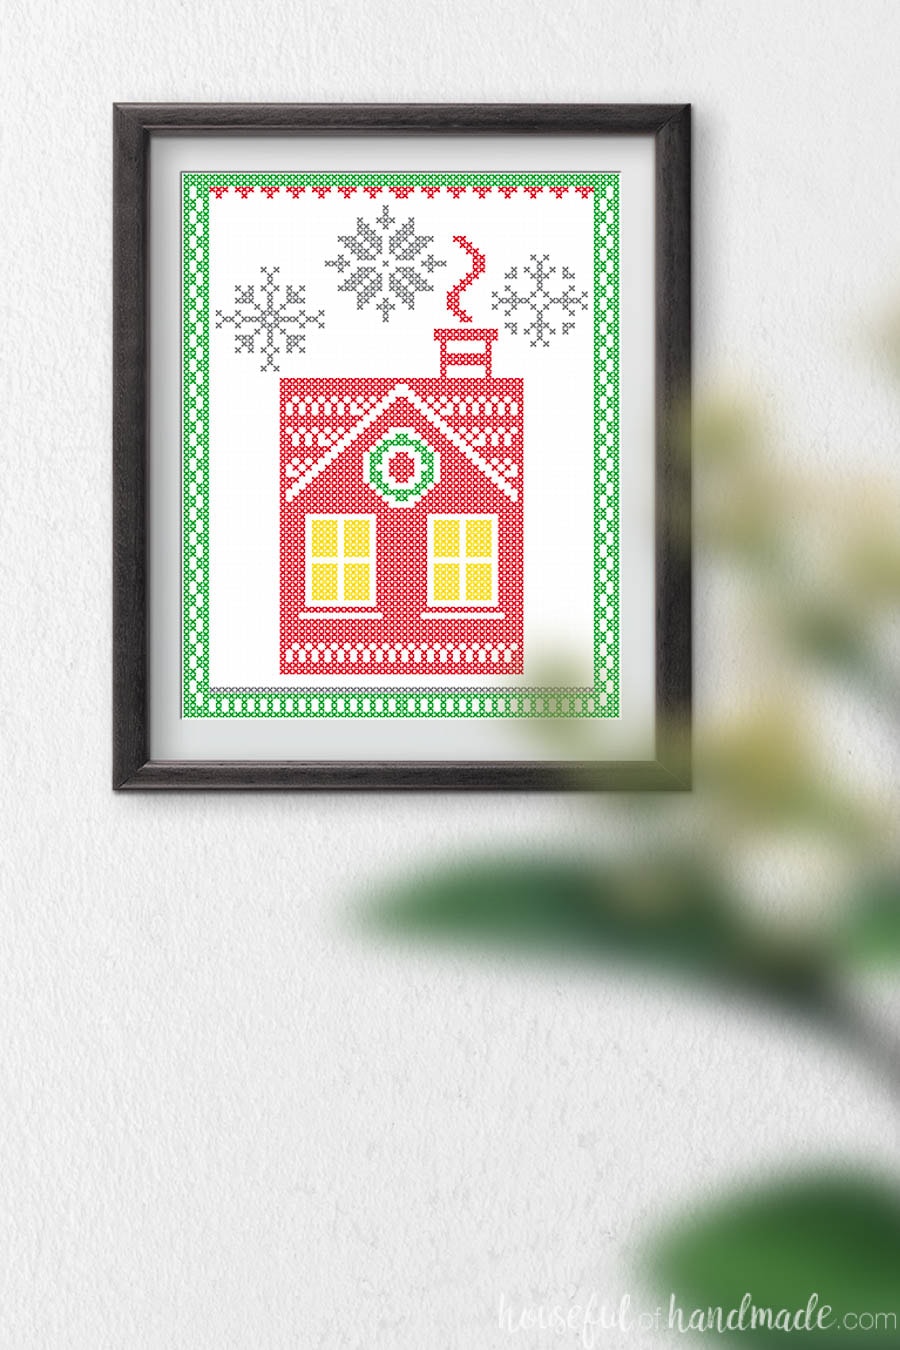 Printable Christmas art that looks like a Nordic Christmas house with cross-stitch snowflakes. 